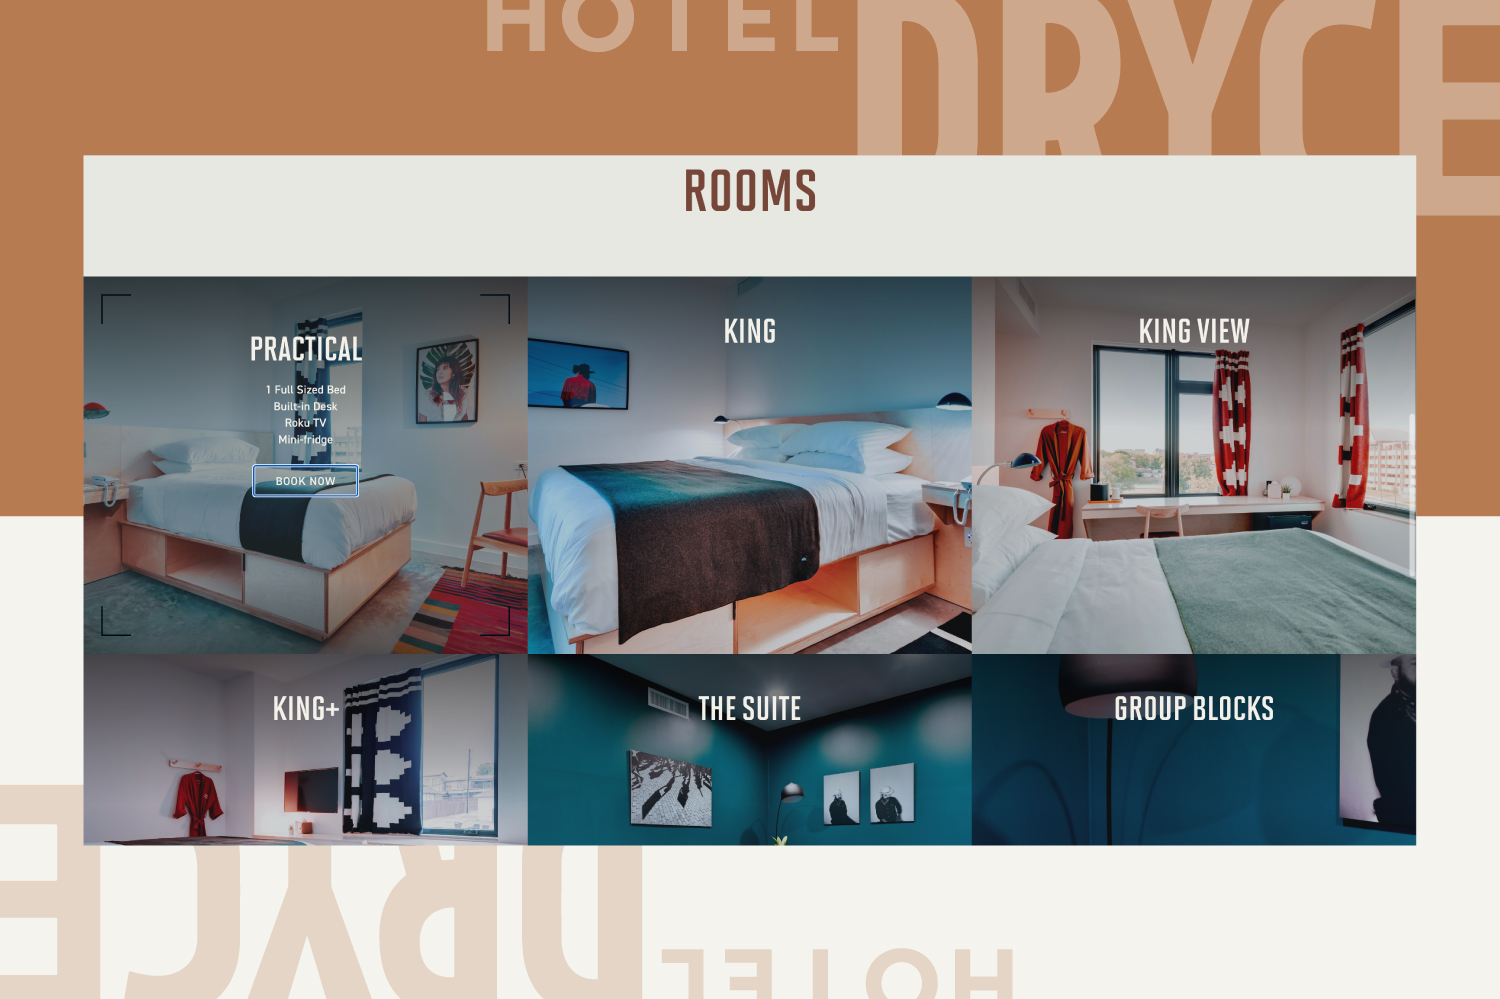 Website Branding for Hotel Dryce Fort Worth Texas